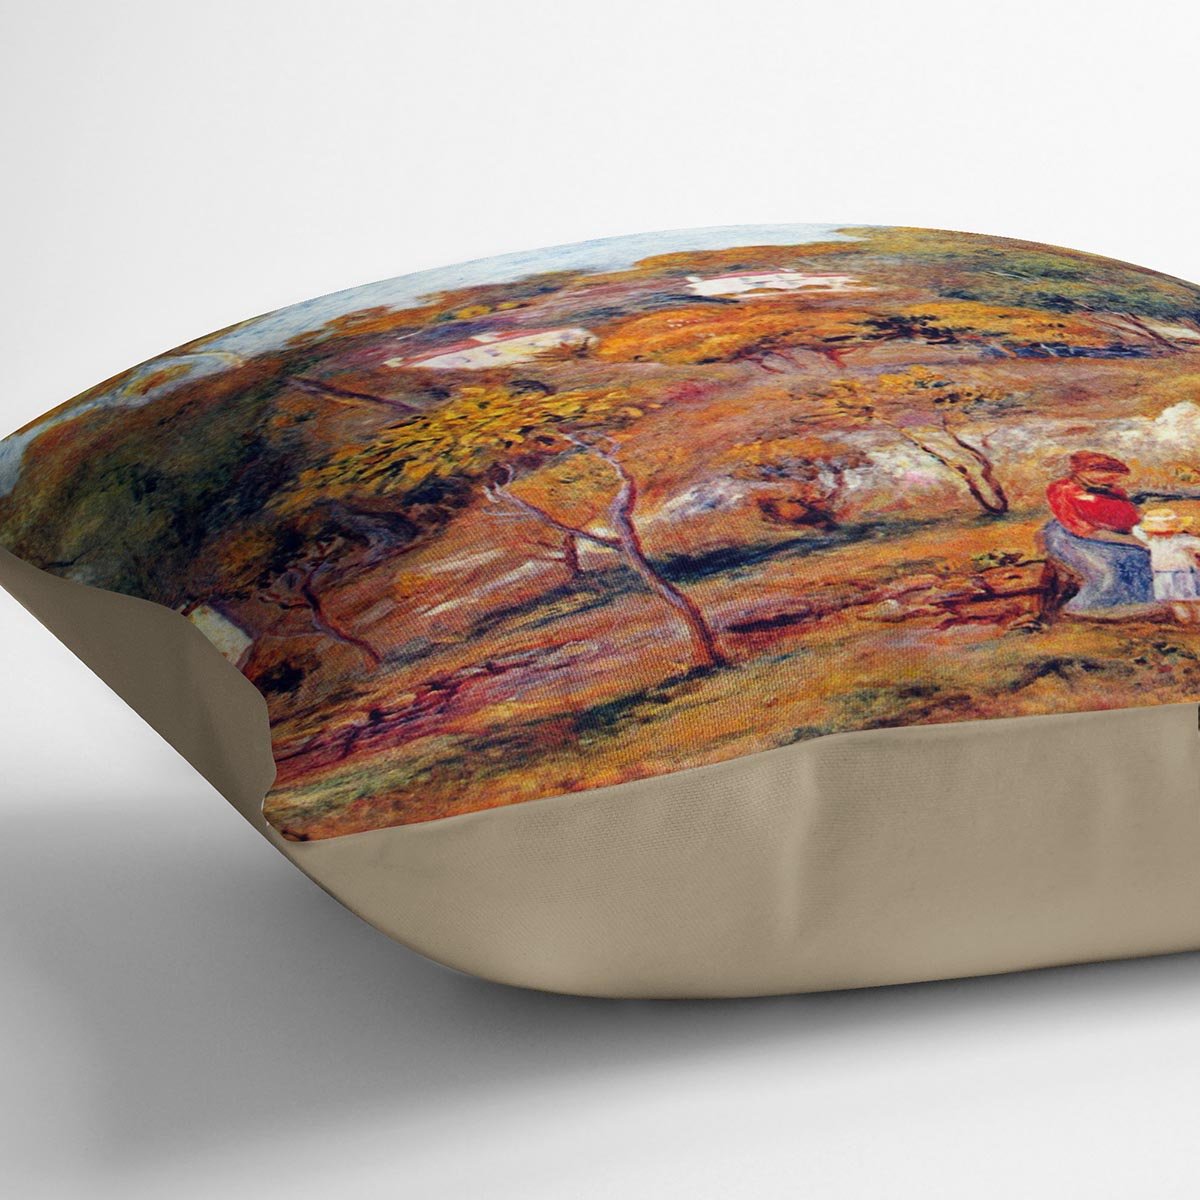 Landscape at Cagnes by Renoir Throw Pillow